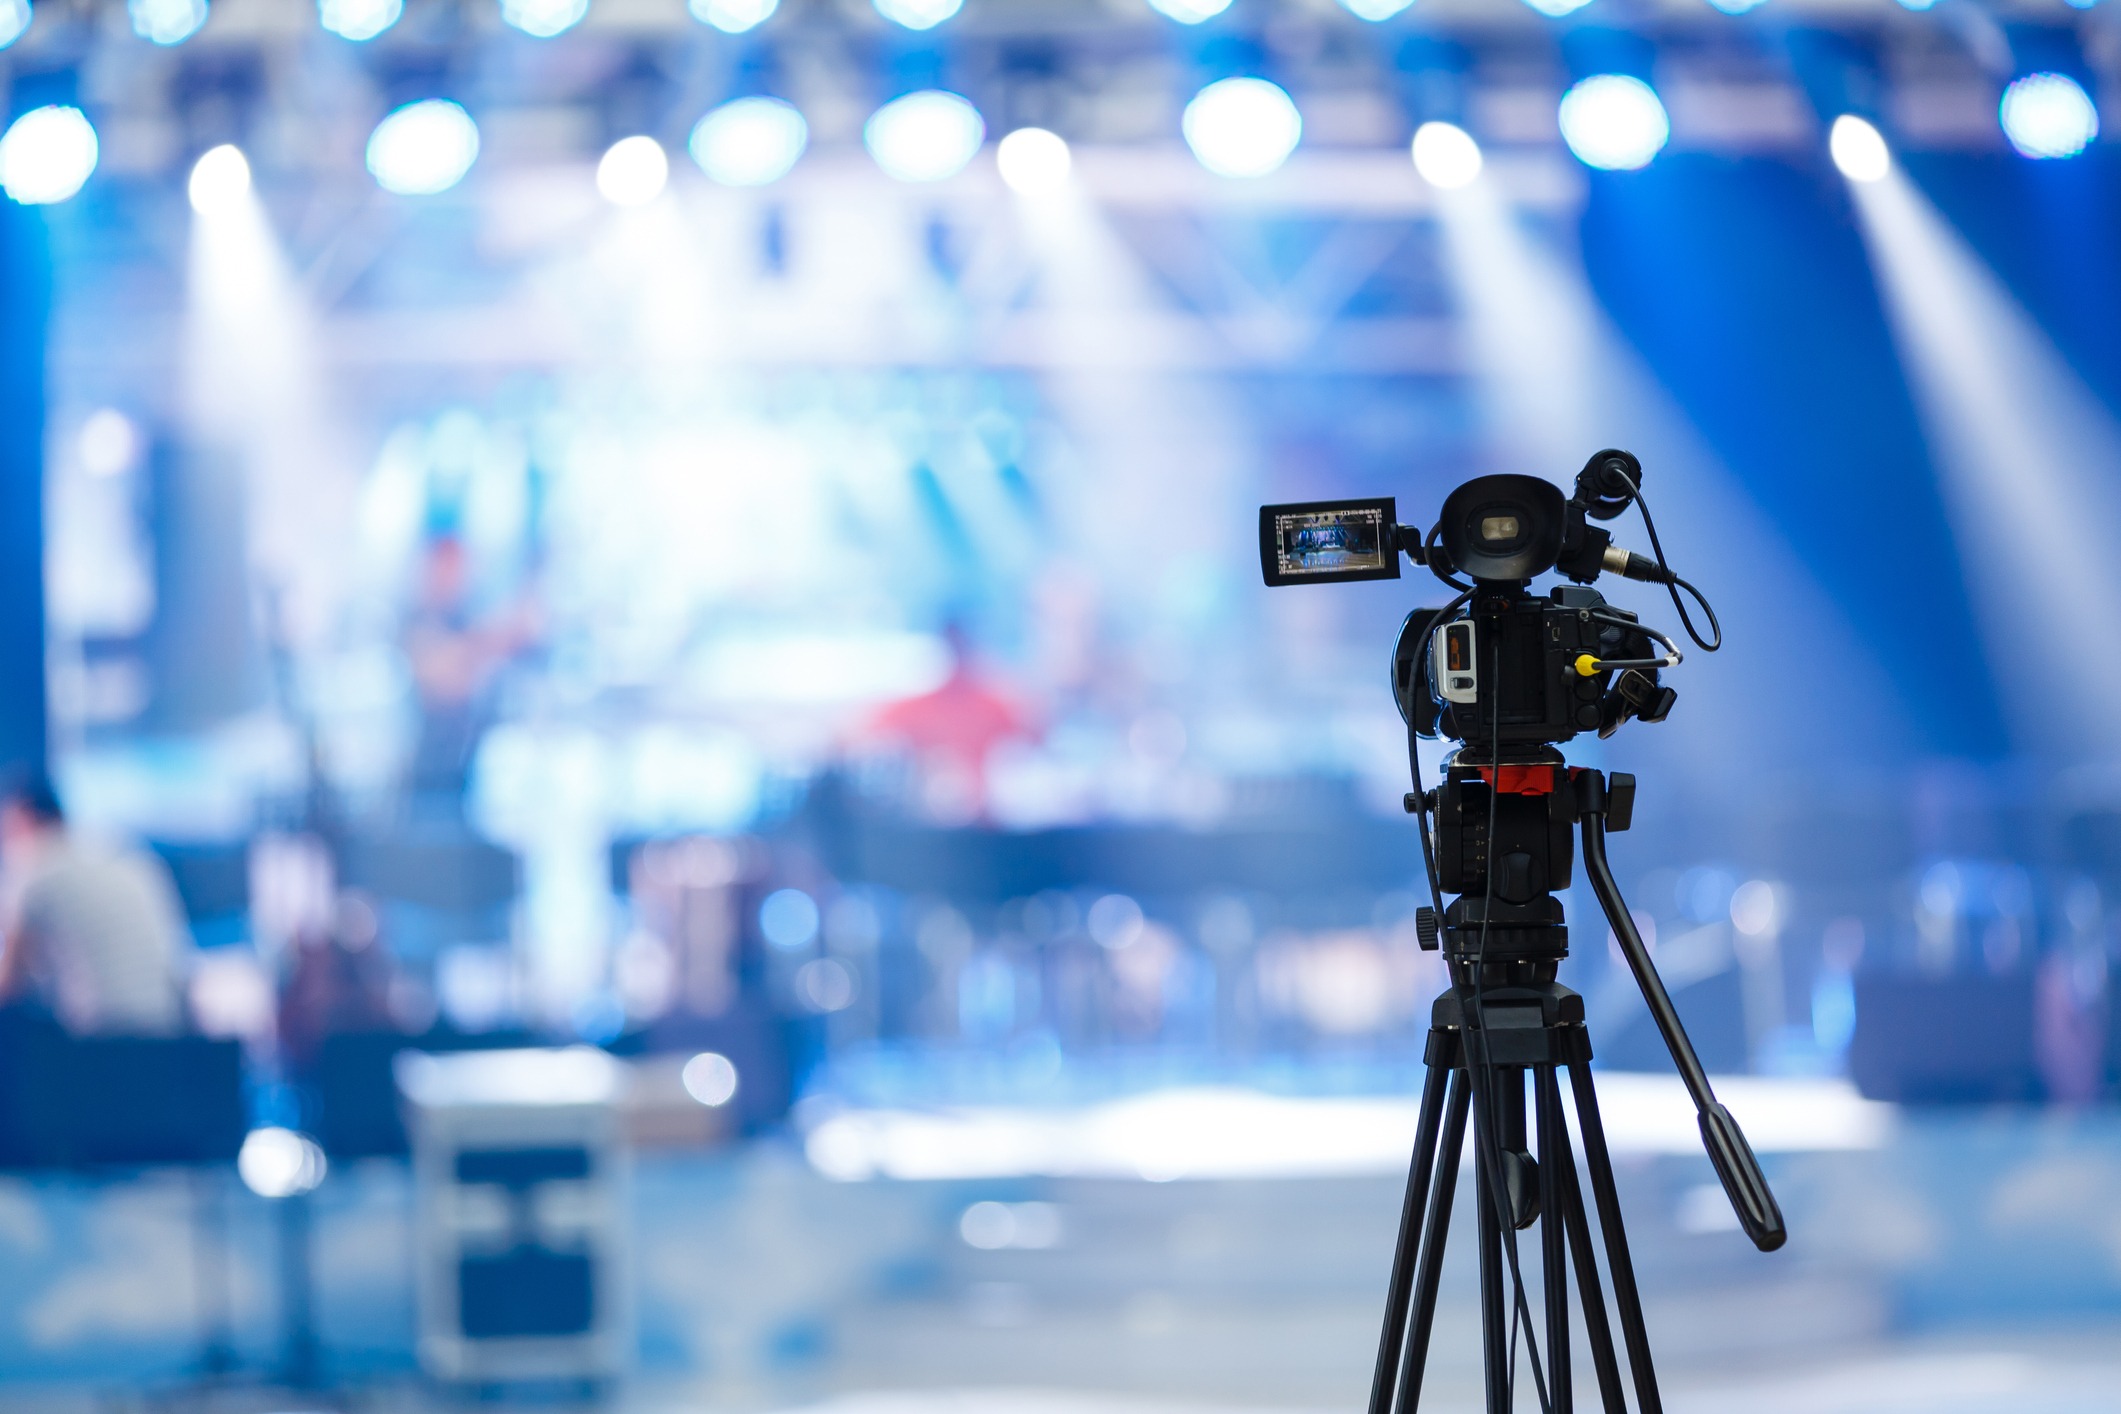 A TV camera set up on a tripod records a blurry stage in the background.